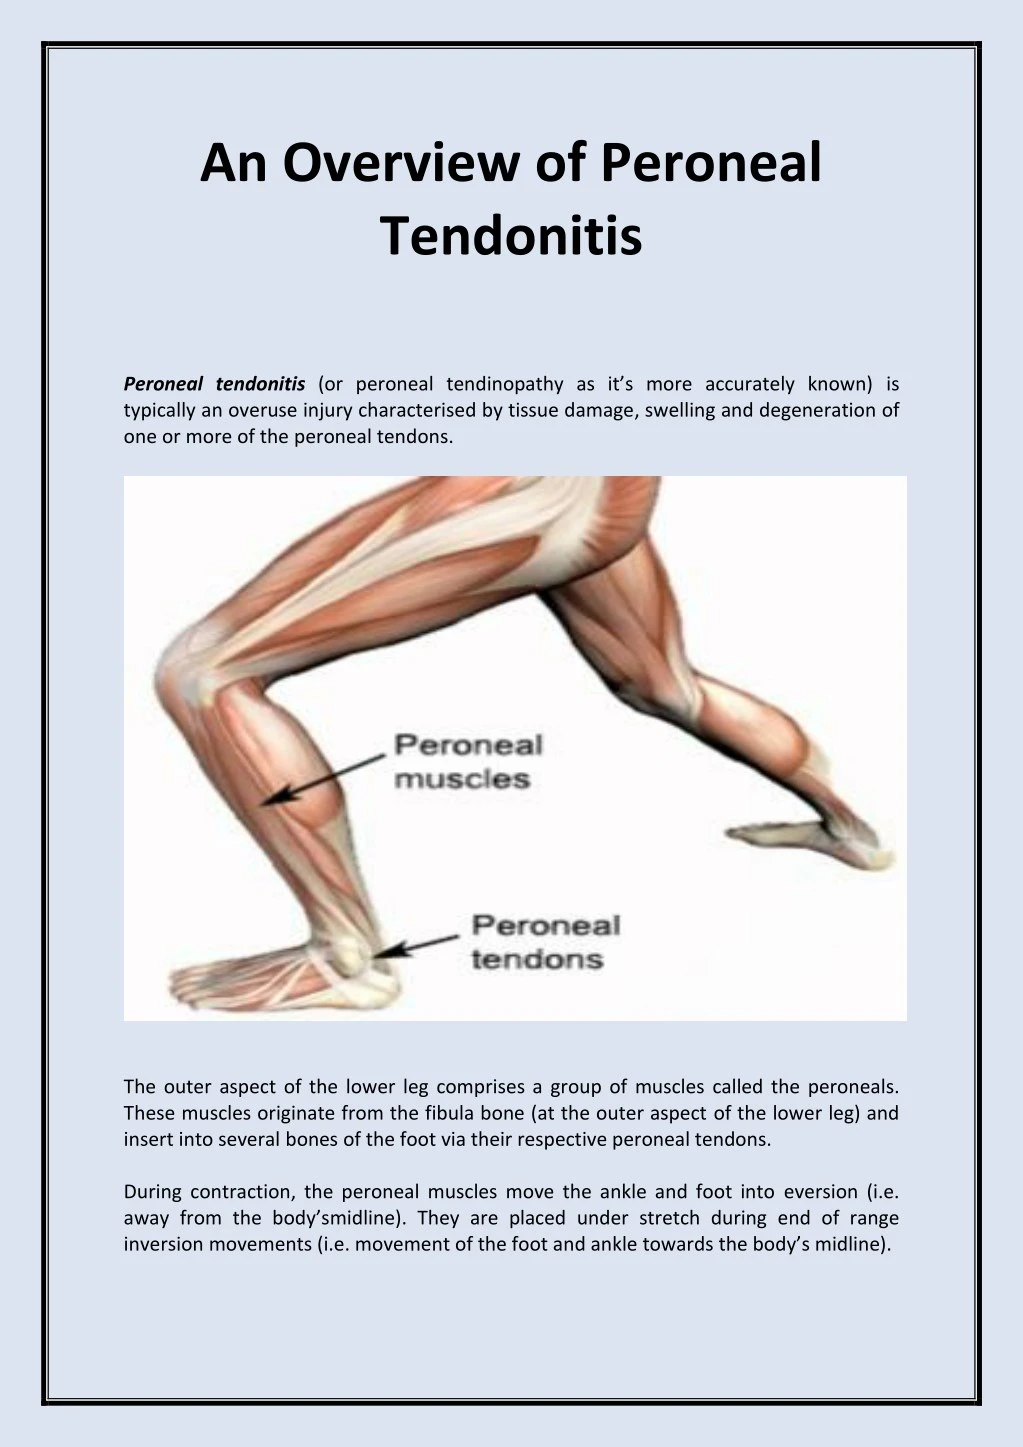 an overview of peroneal tendonitis peroneal